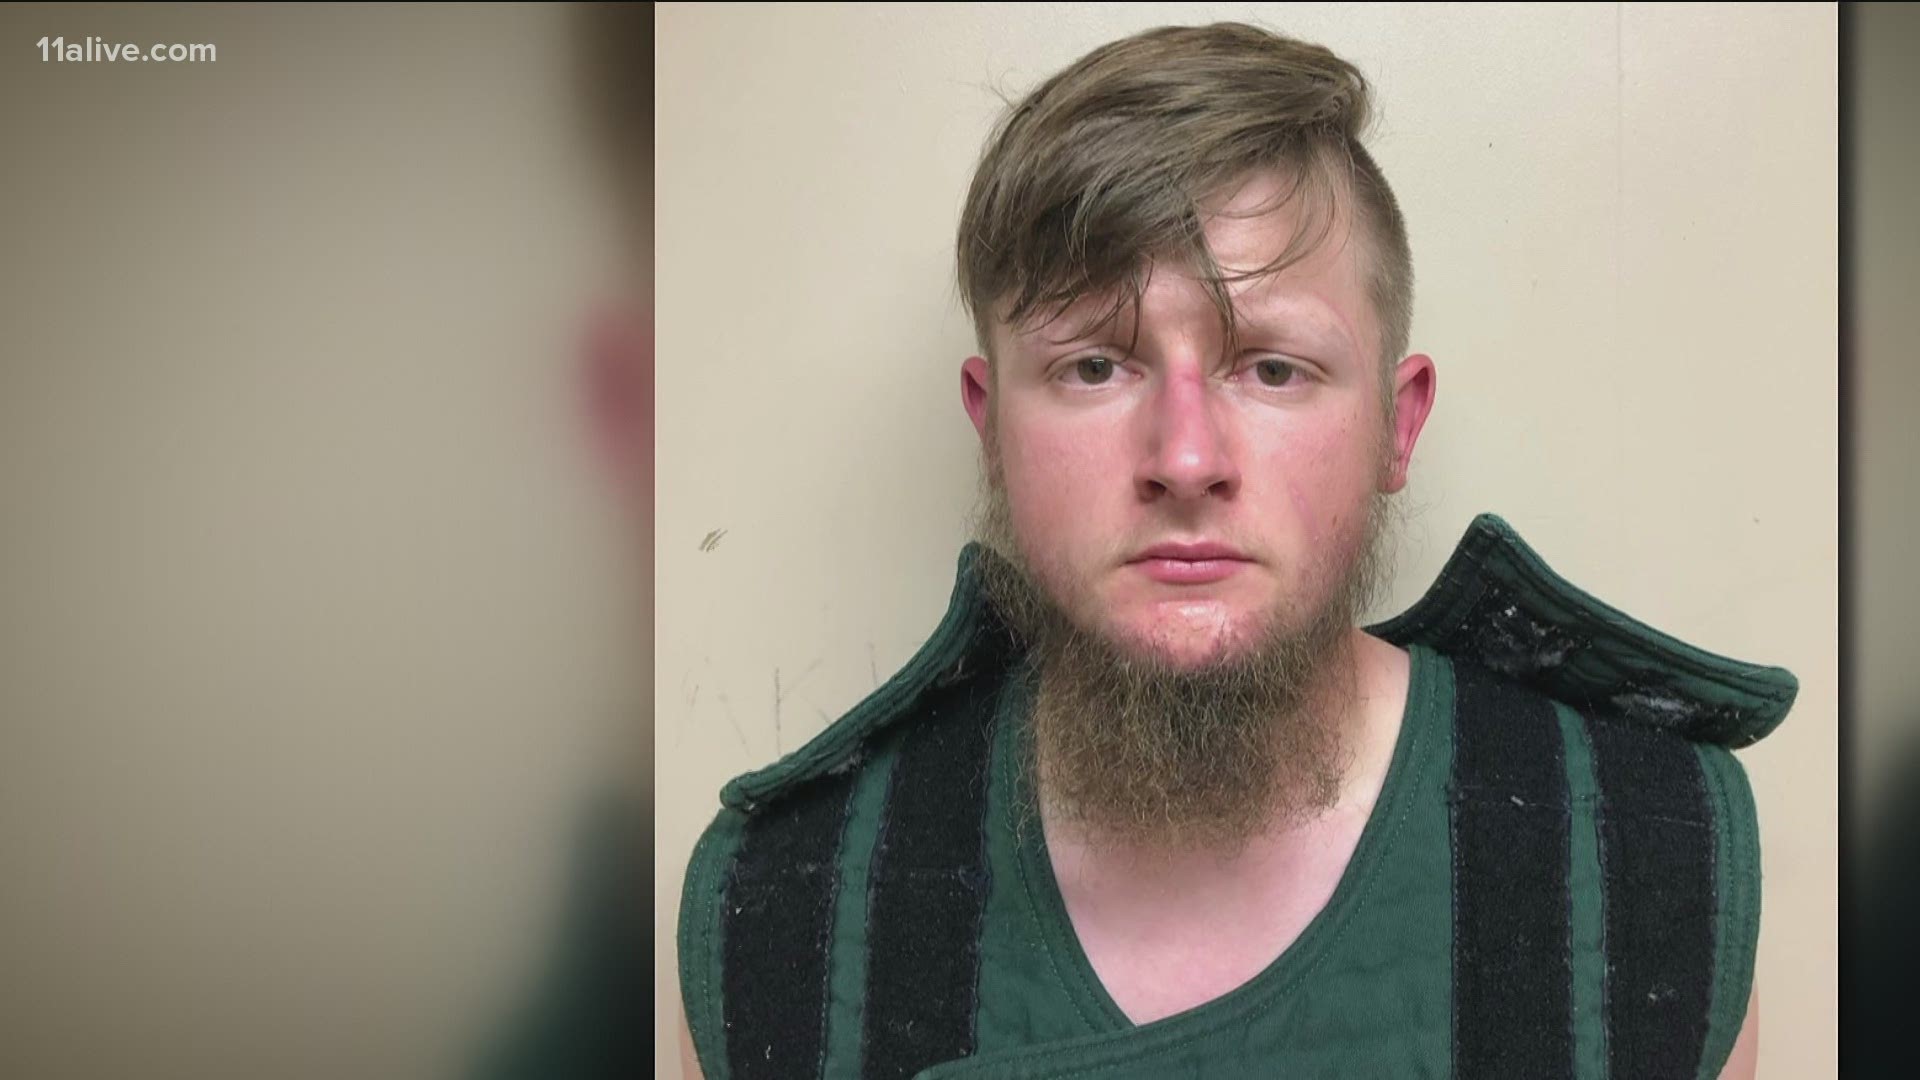 Robert Aaron Long is charged with multiple counts of murder following the shootings that took place at three spas in two jurisdictions - Atlanta and Cherokee County.